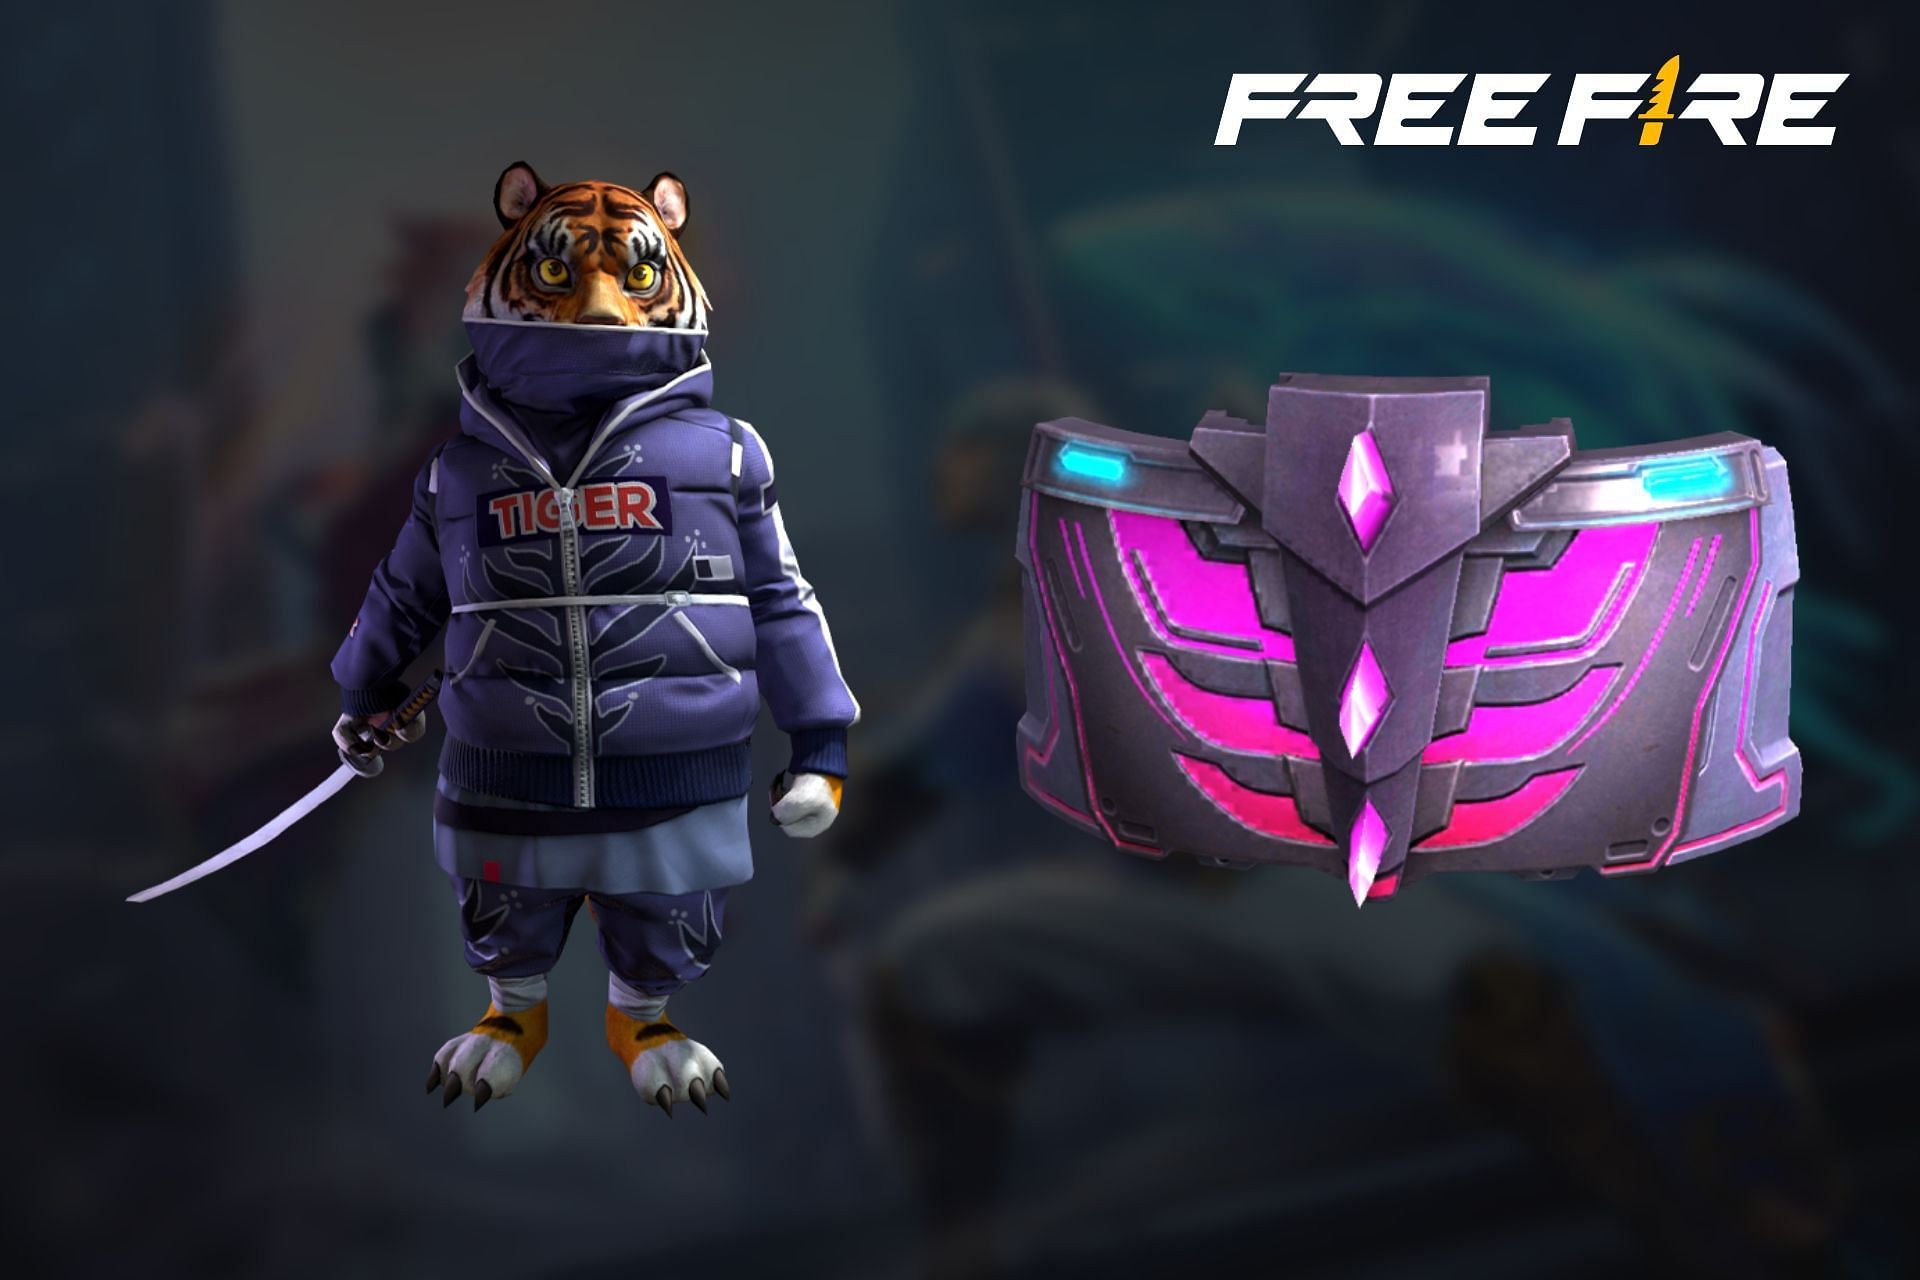 Free Fire redeem code for today (9 July): Get free vouchers